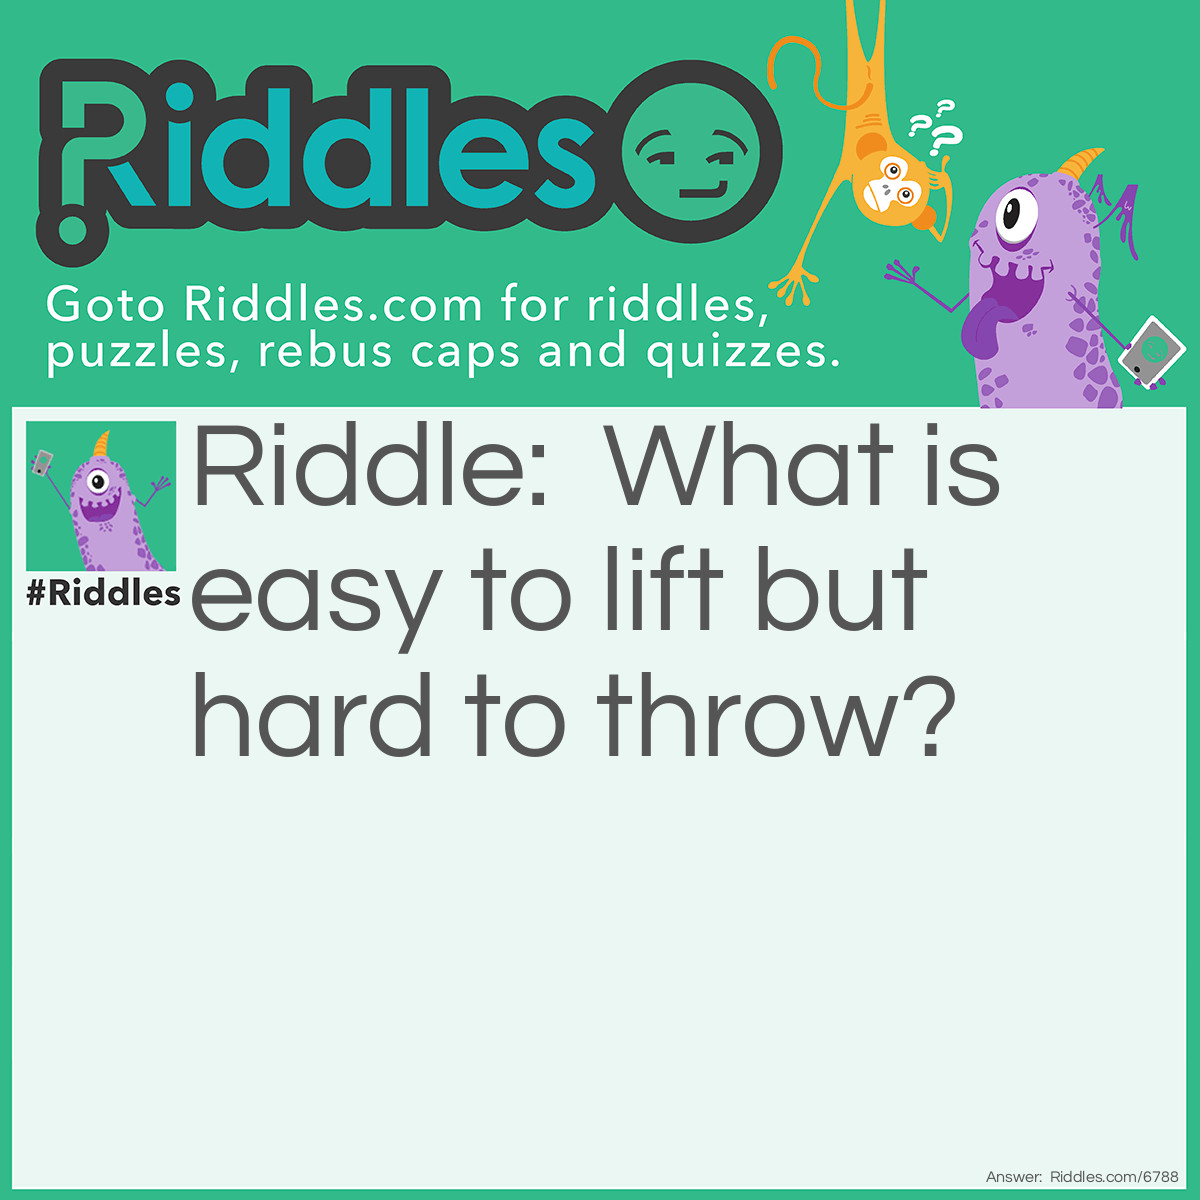 Riddle: What is <a href="/easy-riddles">easy</a> to lift but hard to throw? Answer: A feather.